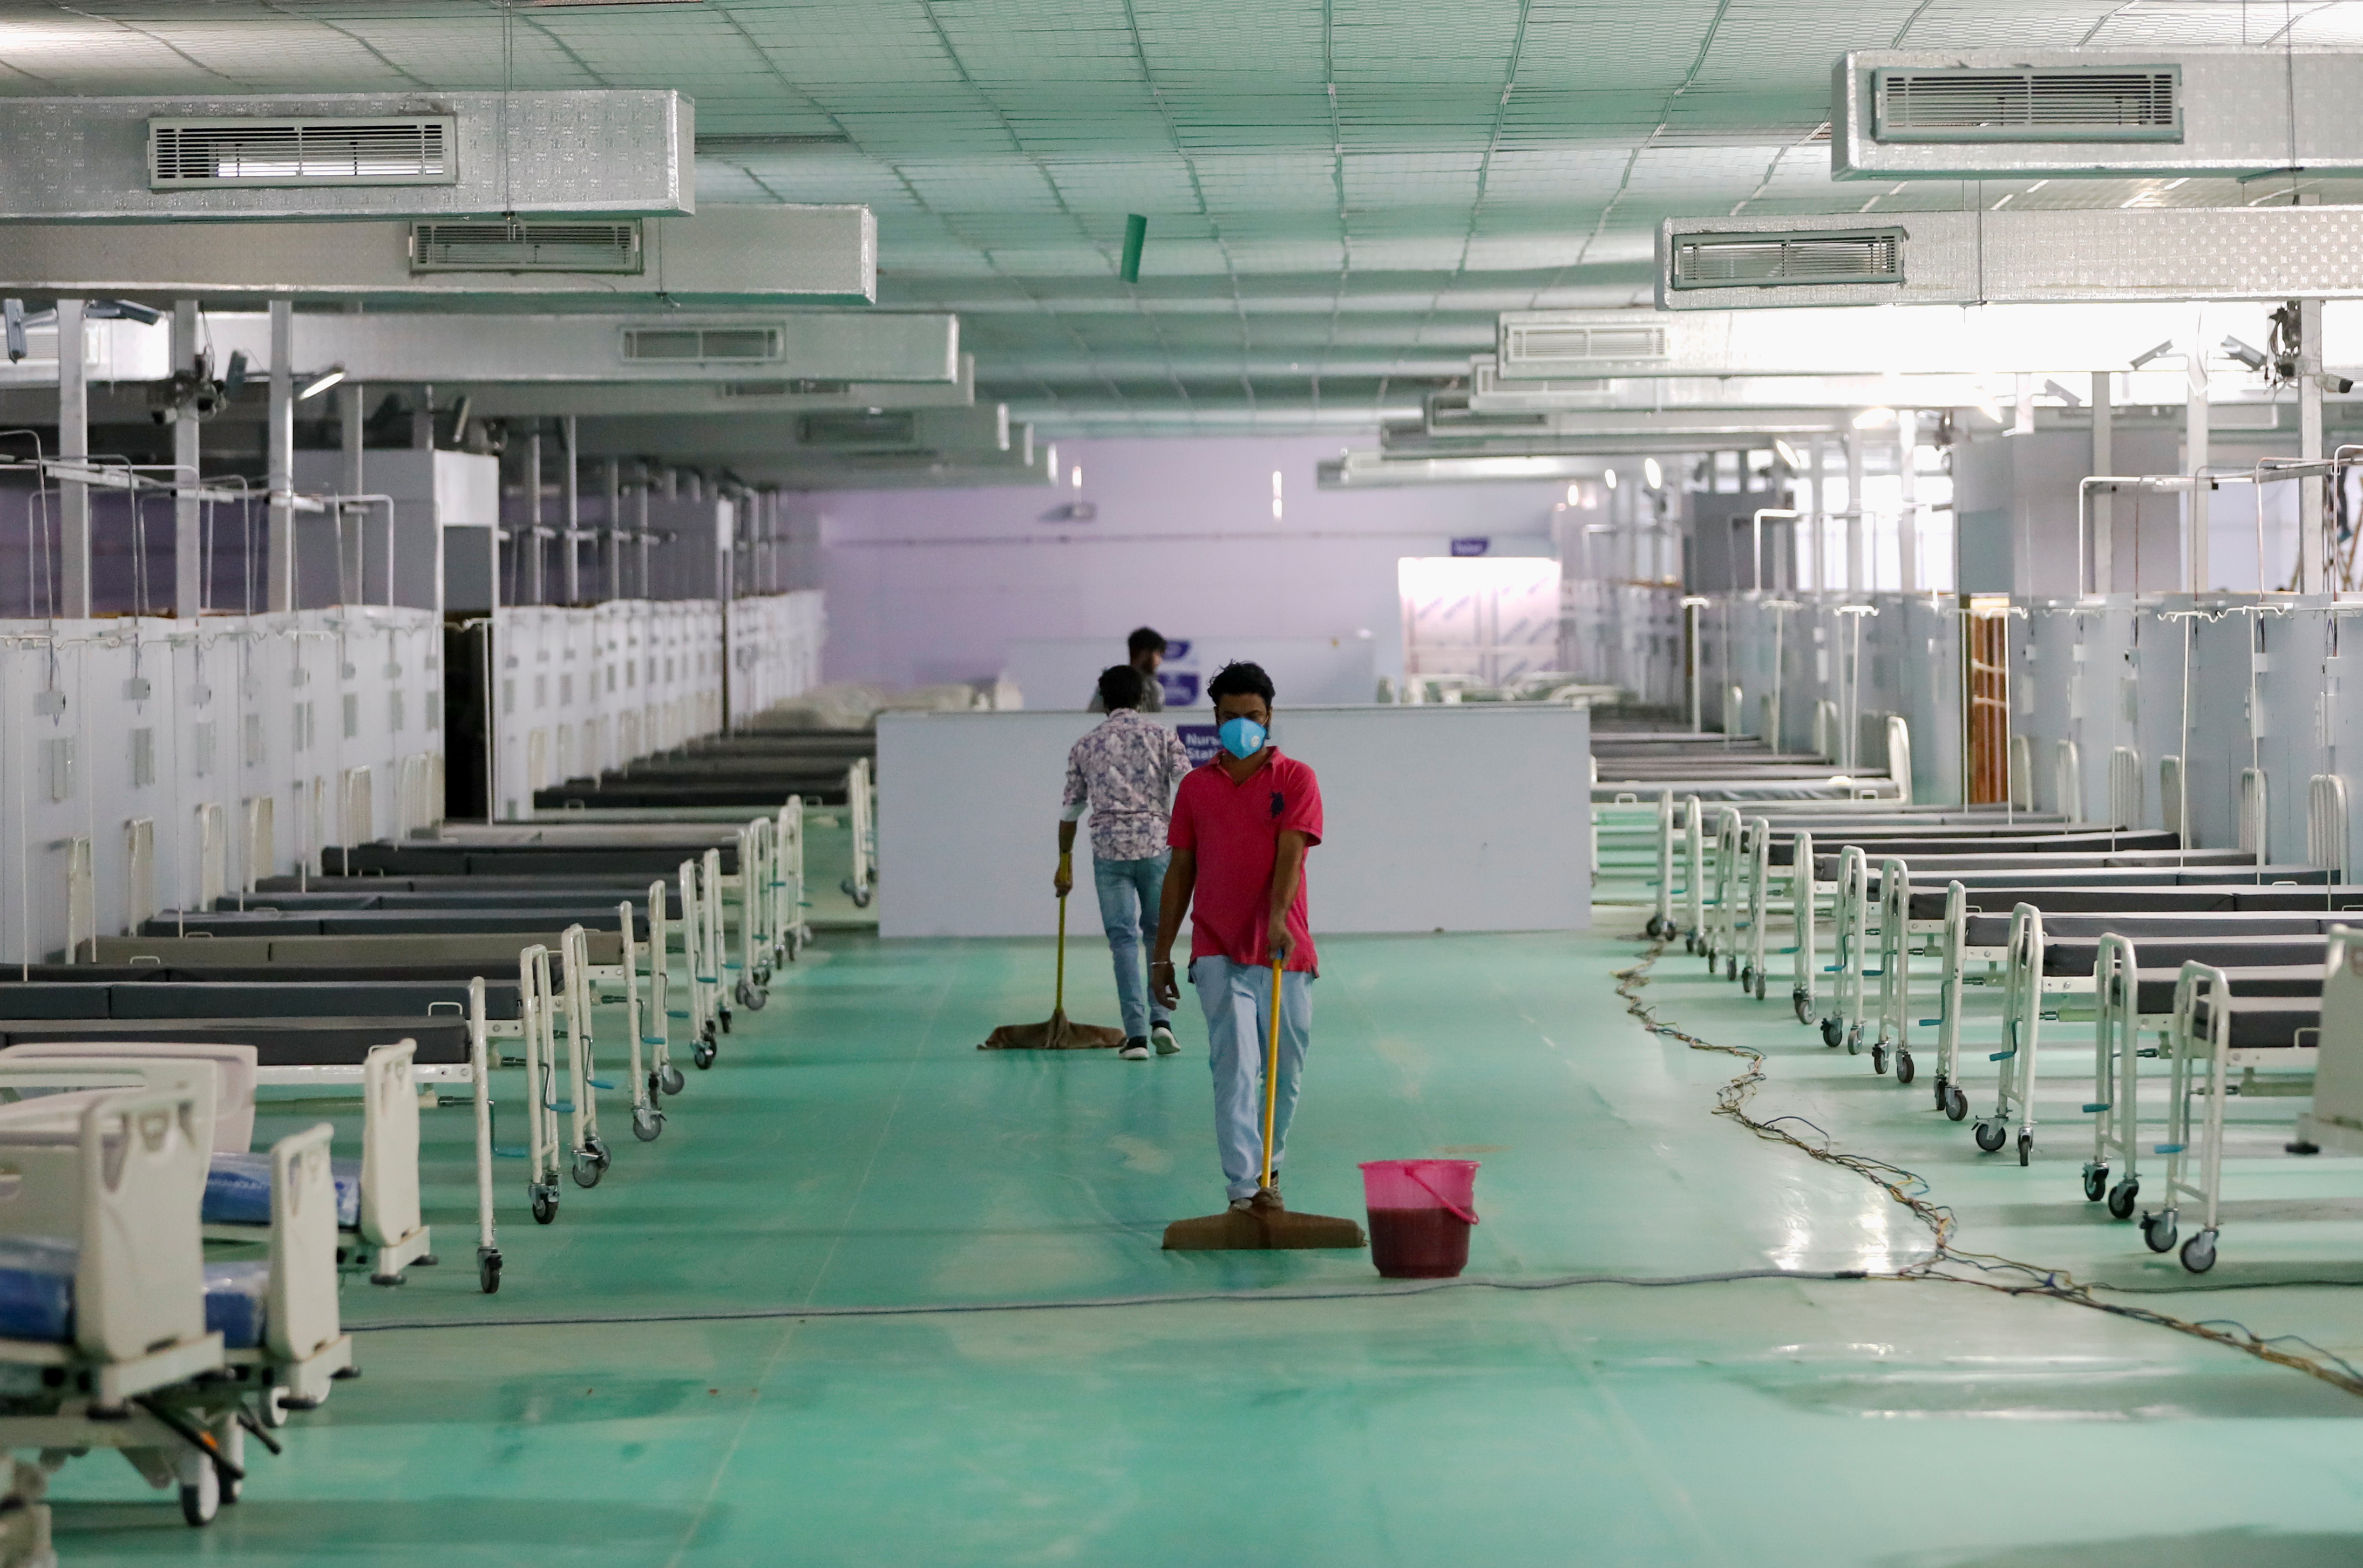 Workers clean floor at temporary COVID-19 care facility in New Delhi